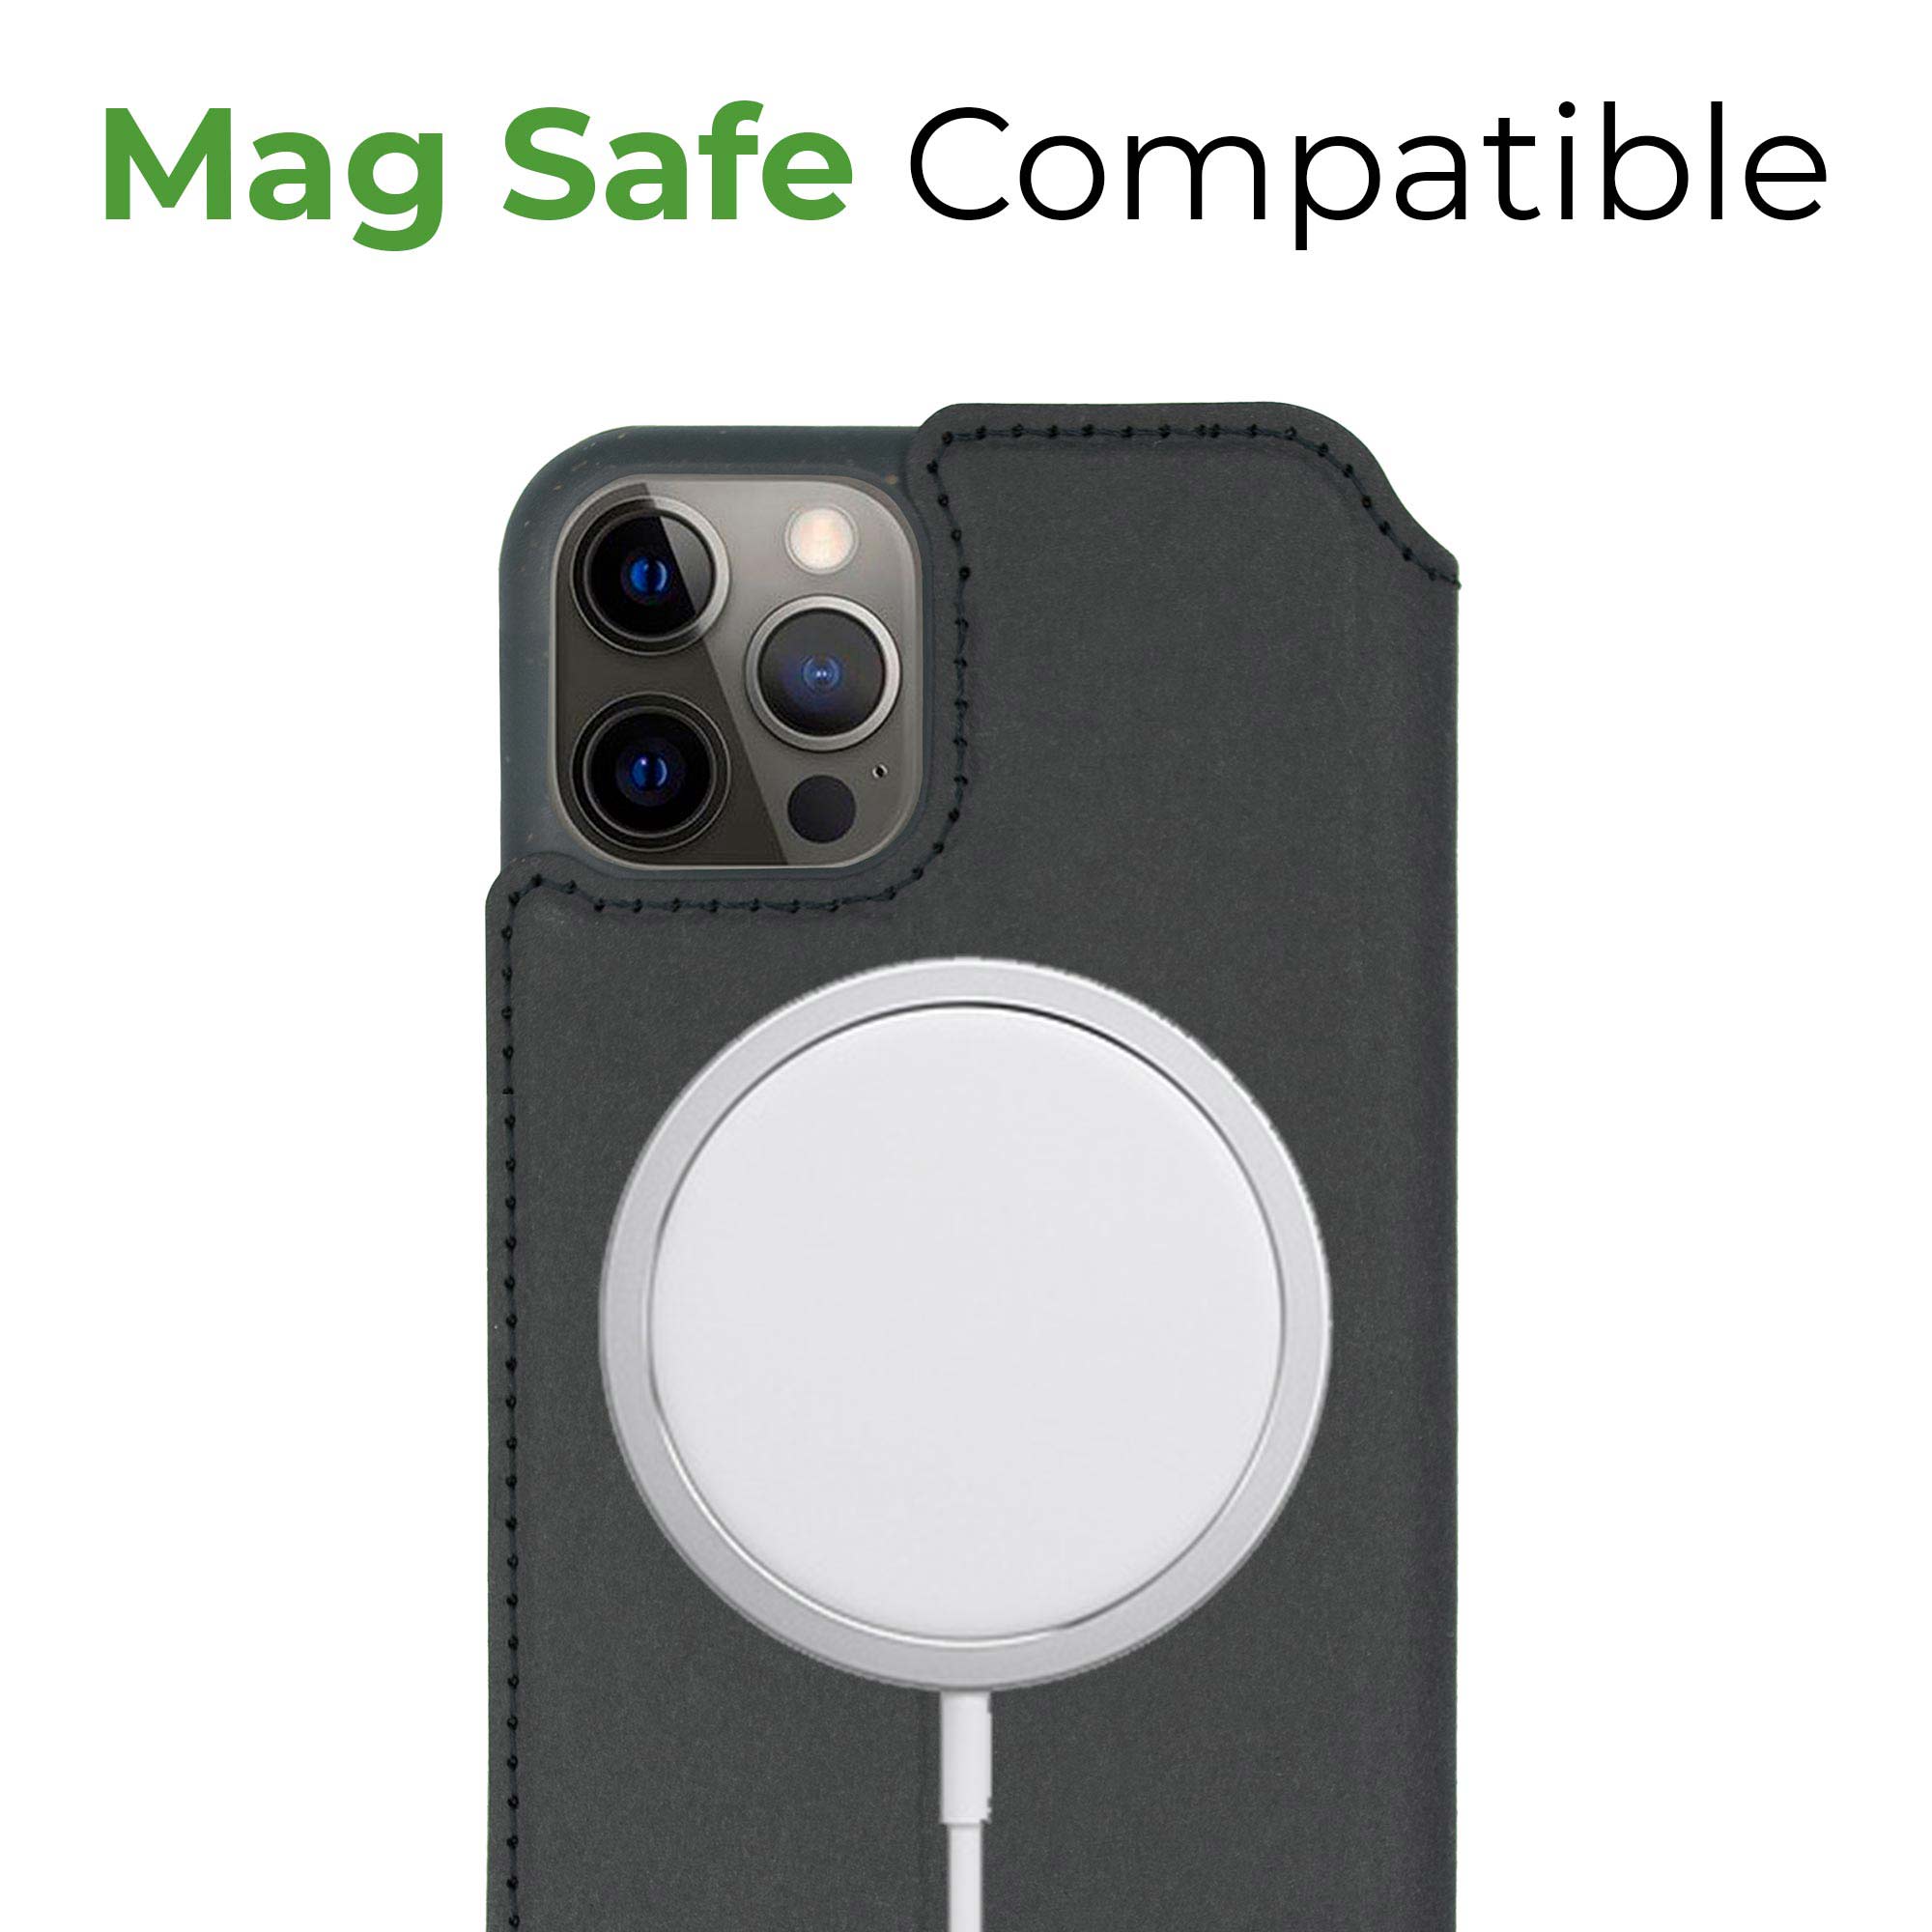 The flip case is Wireless Charging Compatible